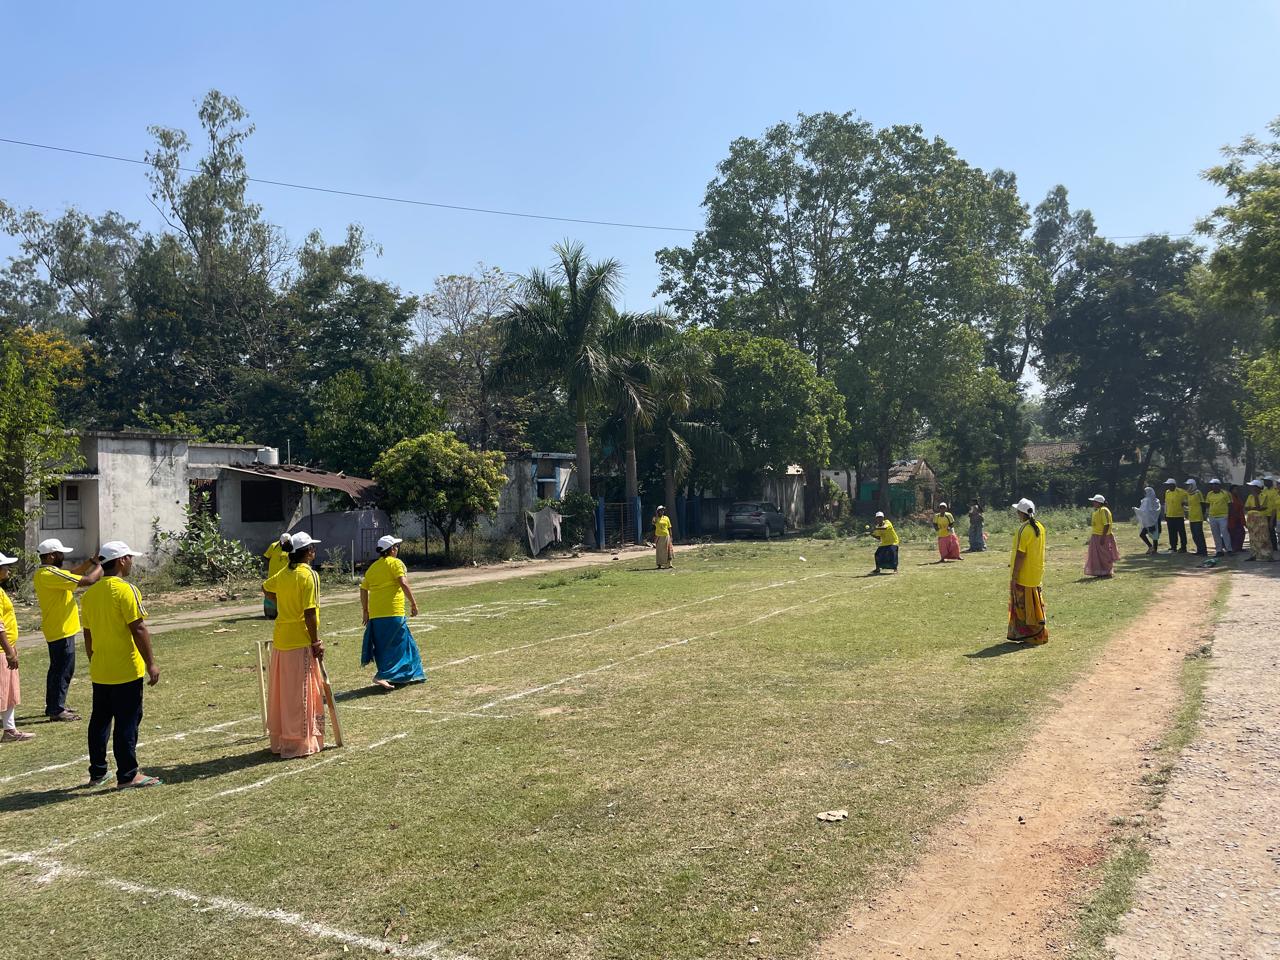 Sweep shot cricket match was organized under the Sweep program